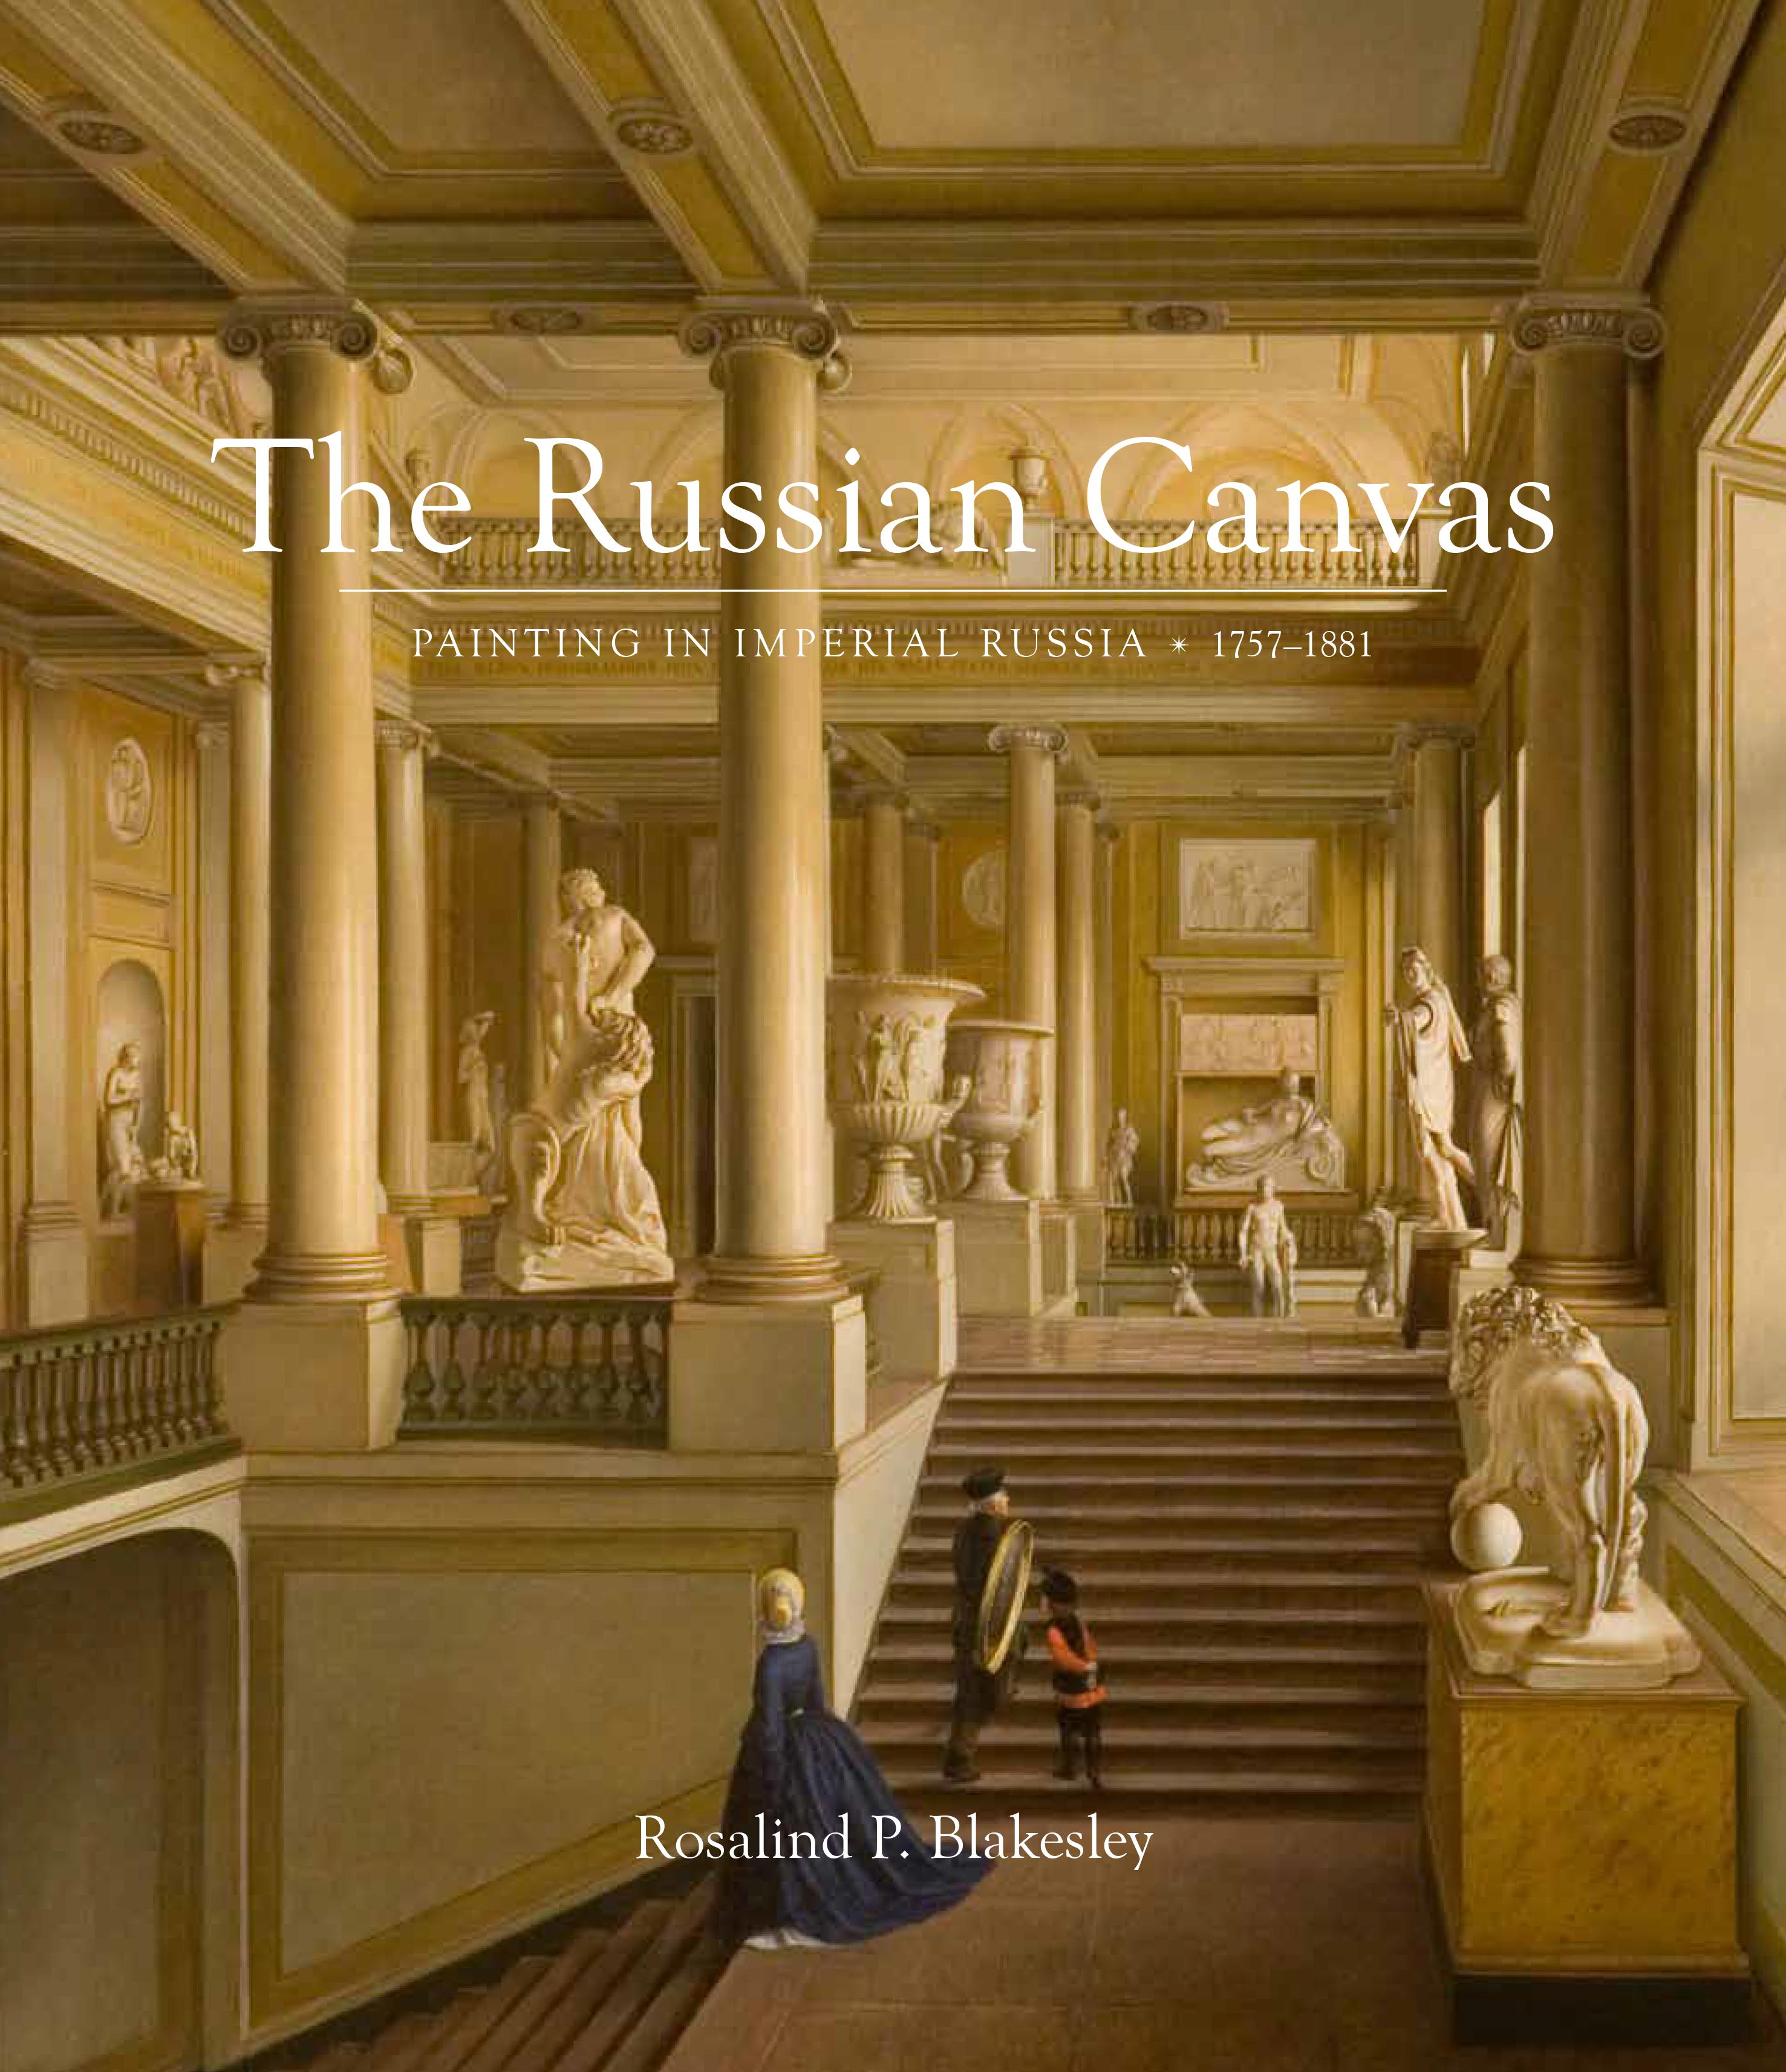 Rosalind Polly Blakesley’s latest book, The Russian Canvas: Painting in Imperial Russia 1757-1881 has just been published by Yale University Press and she has also curated and written the catalogue for the exhibition Russia and the Arts in London